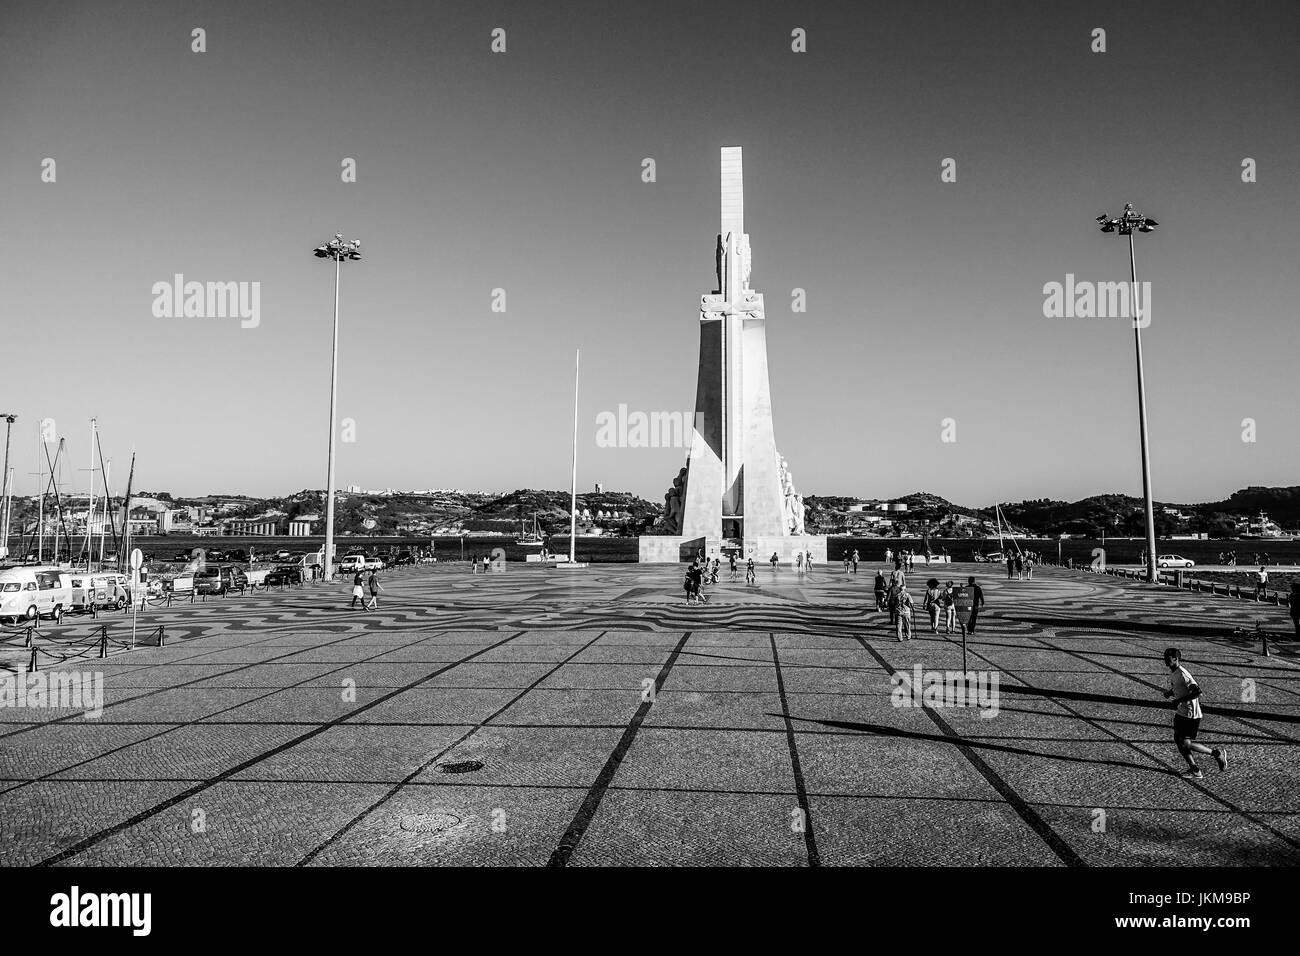 Monument of the Discoveries in Lisbon Belem at Tagus River  - LISBON, PORTUGAL - 2017 Stock Photo